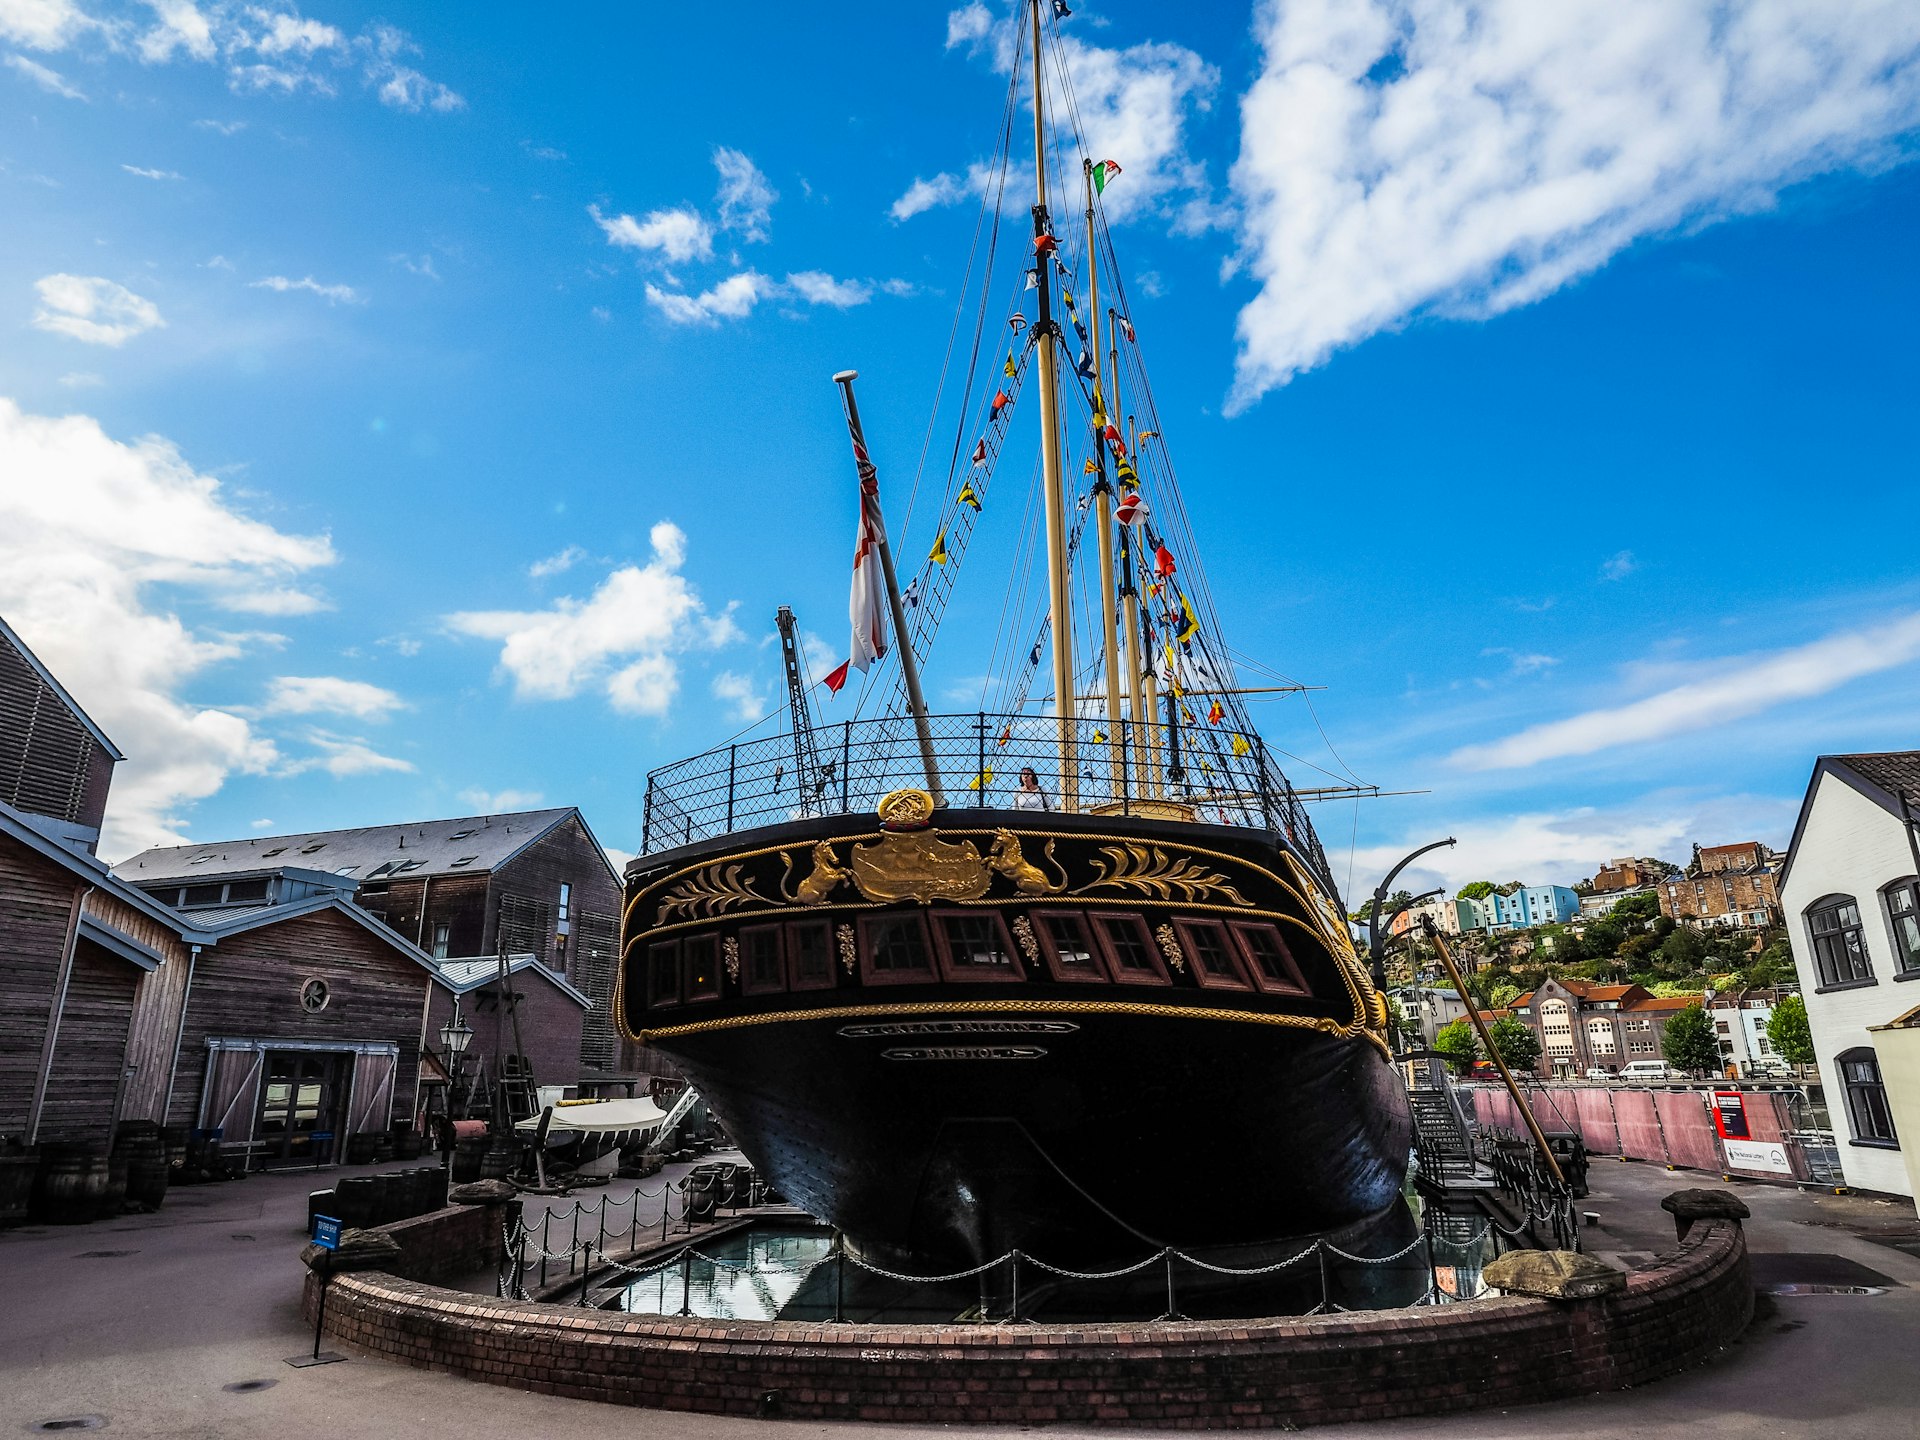 The stern of the SS Great Britain, a historic ship open to tourists in Bristol, Southwest, England, UK